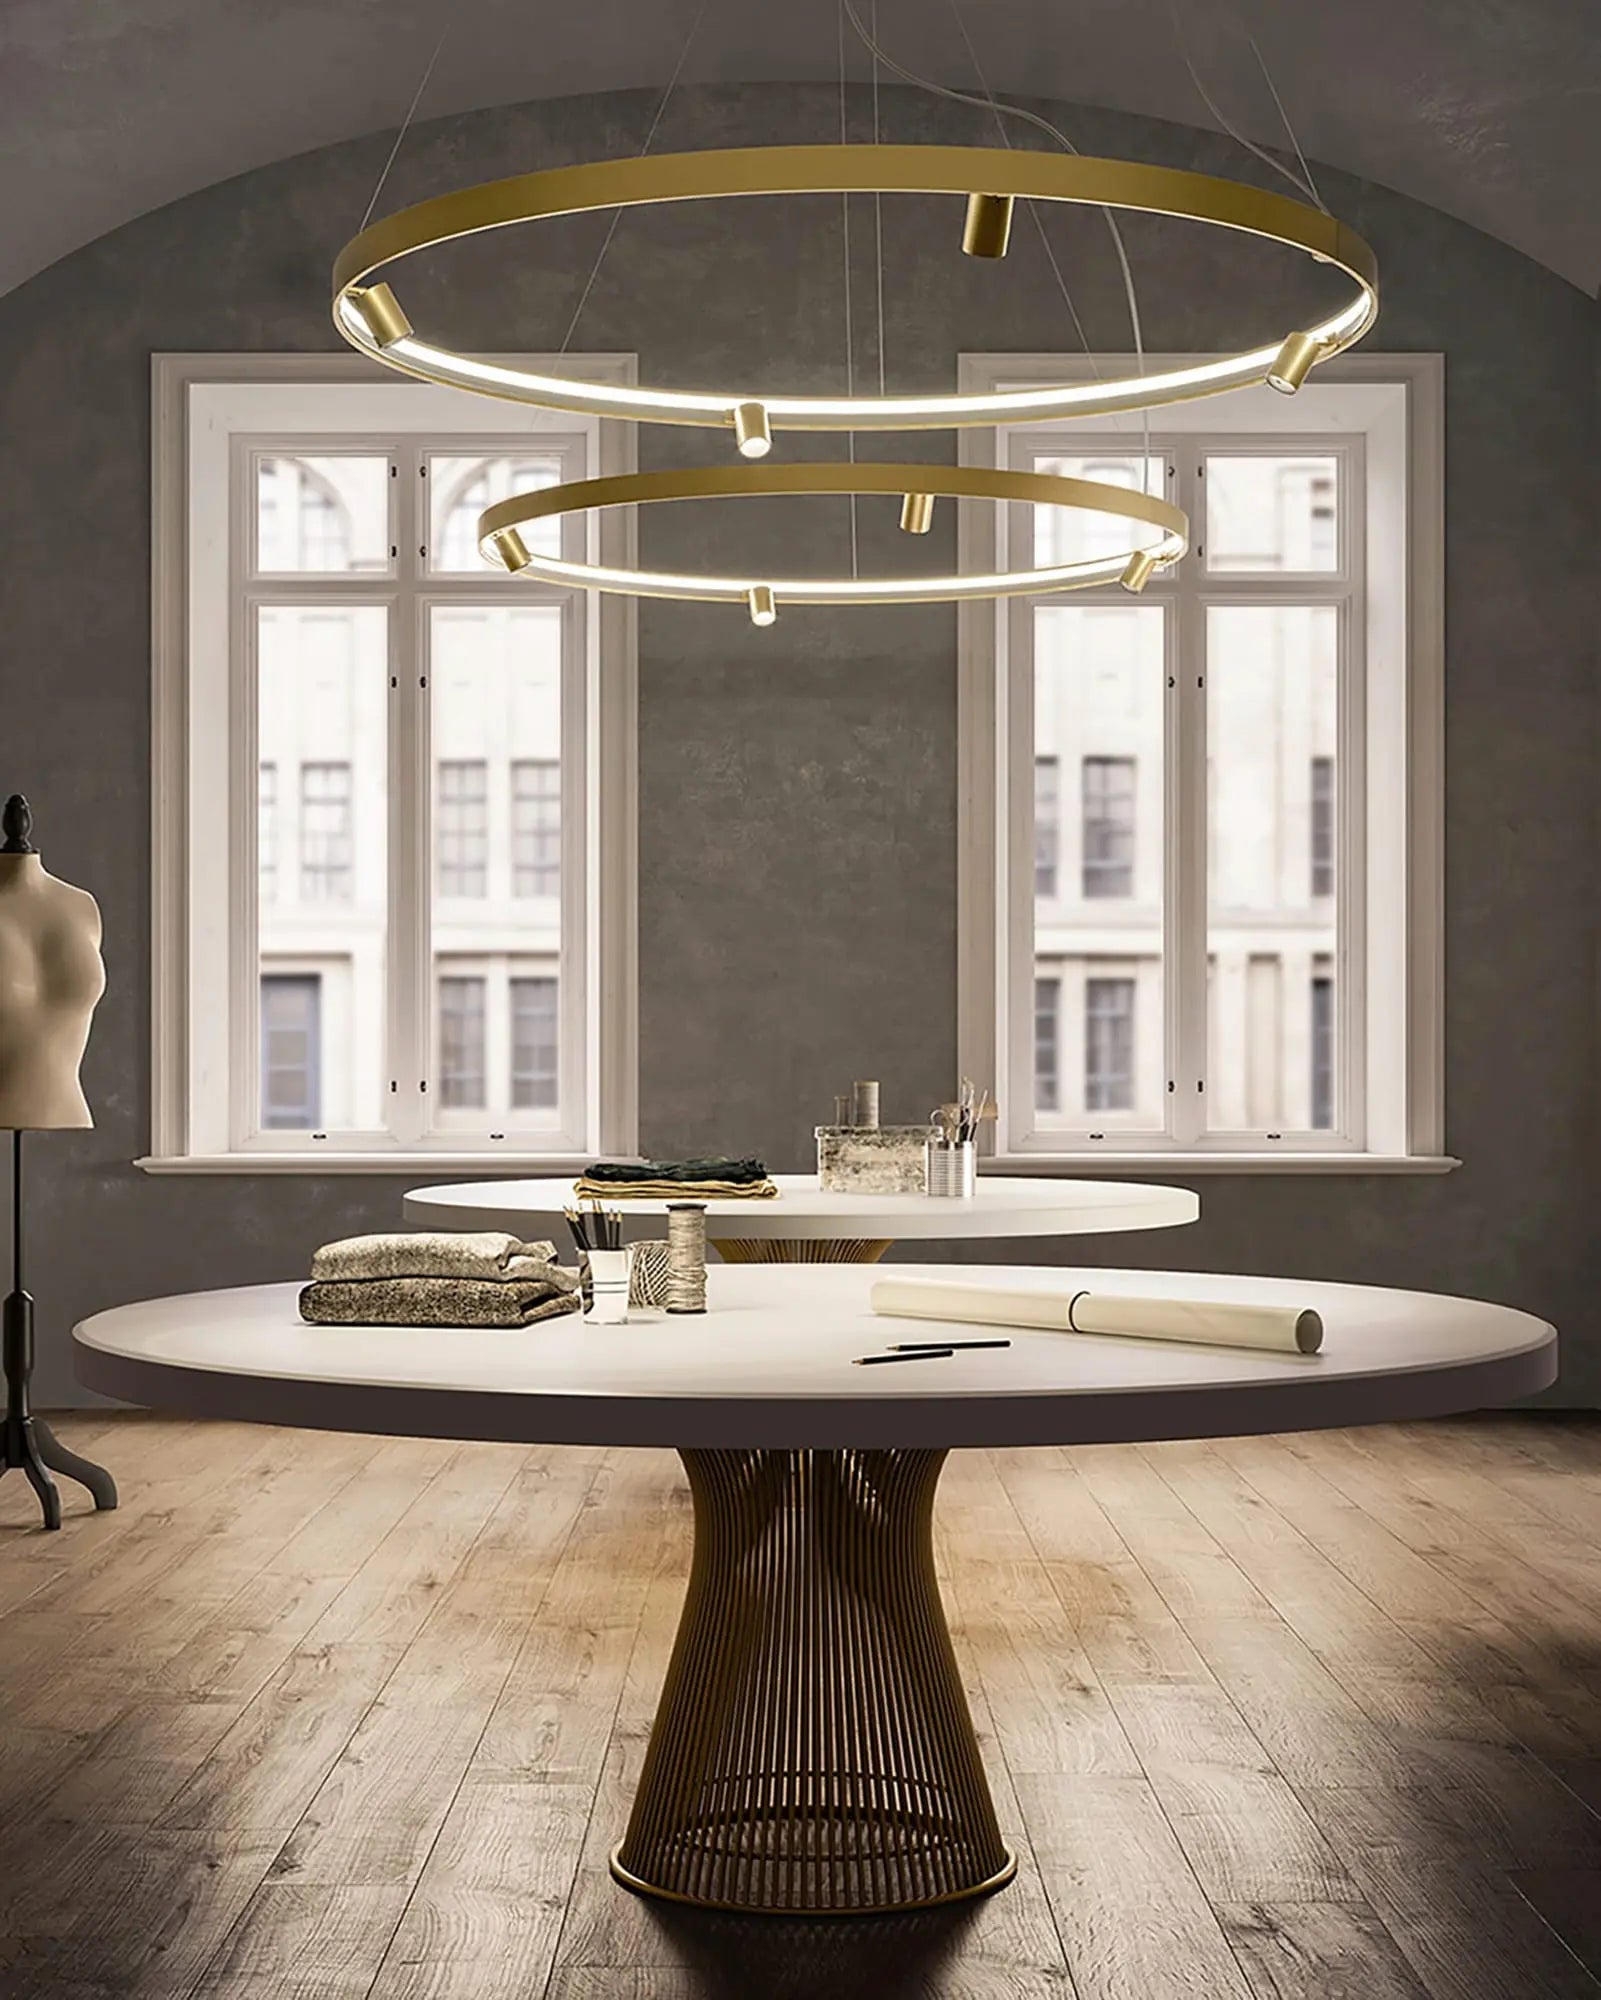 Arena circular pendant light with spotlight above a round table